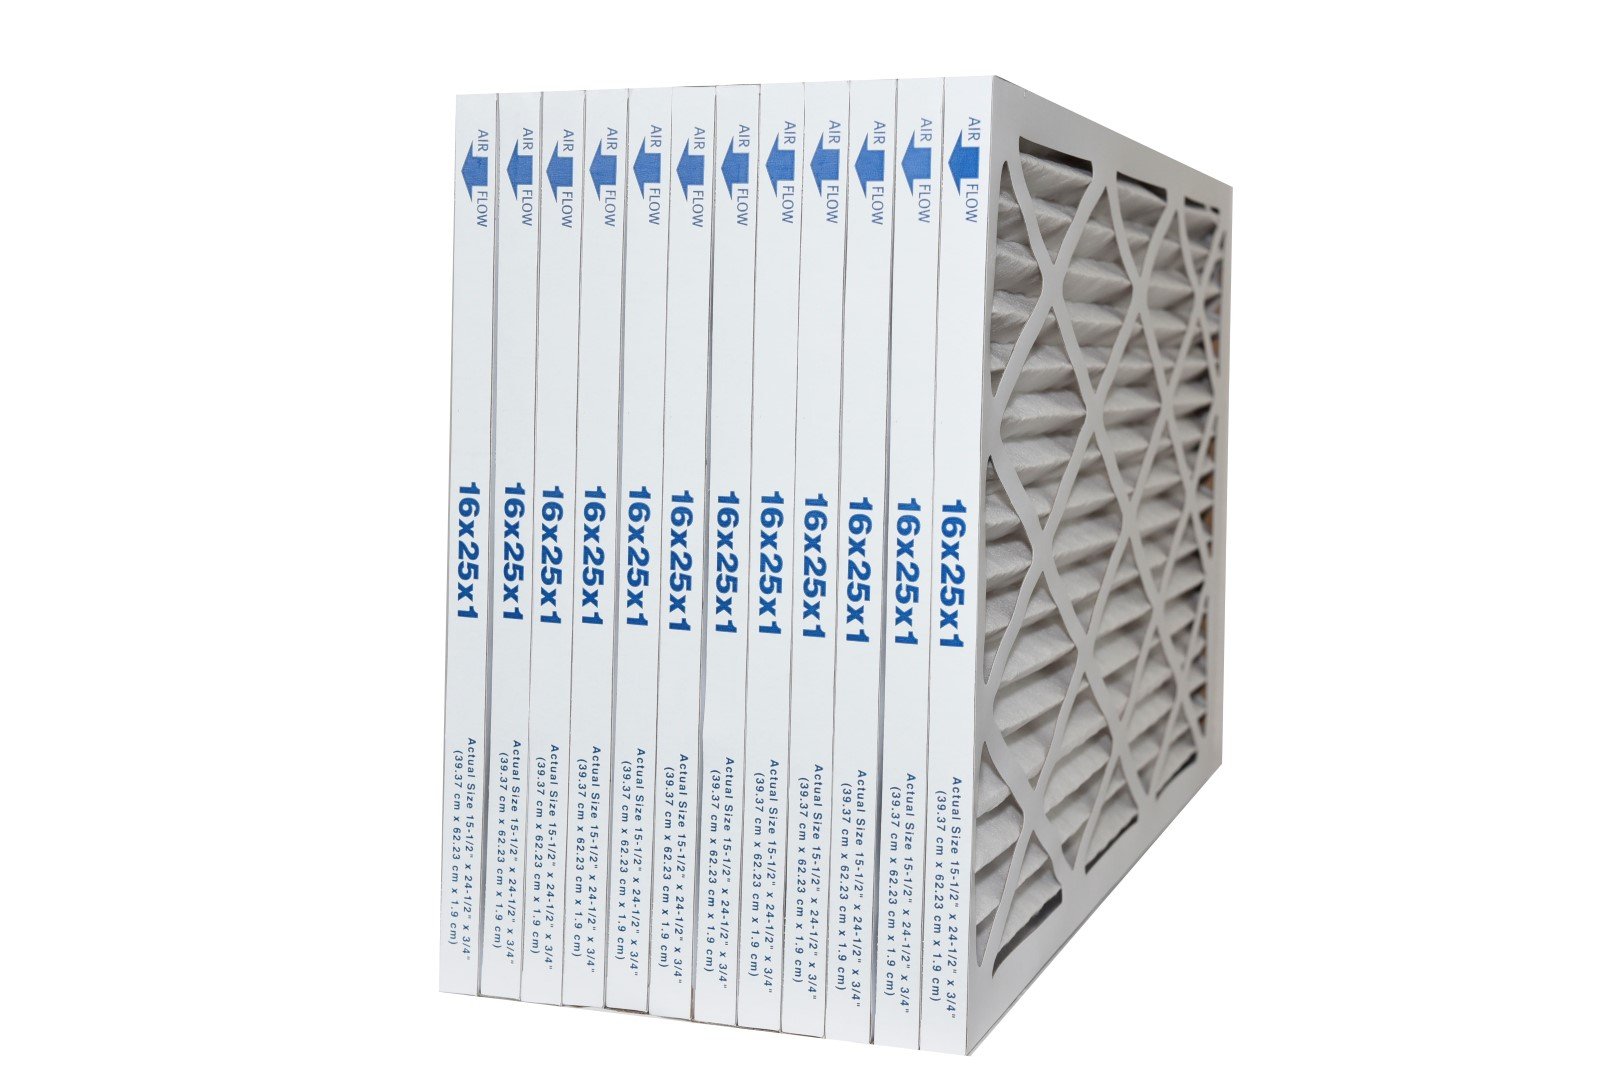 Standard 16 x 25 x 1 Pleated Furnace Filters. MERV 13 Rated. Case of 12